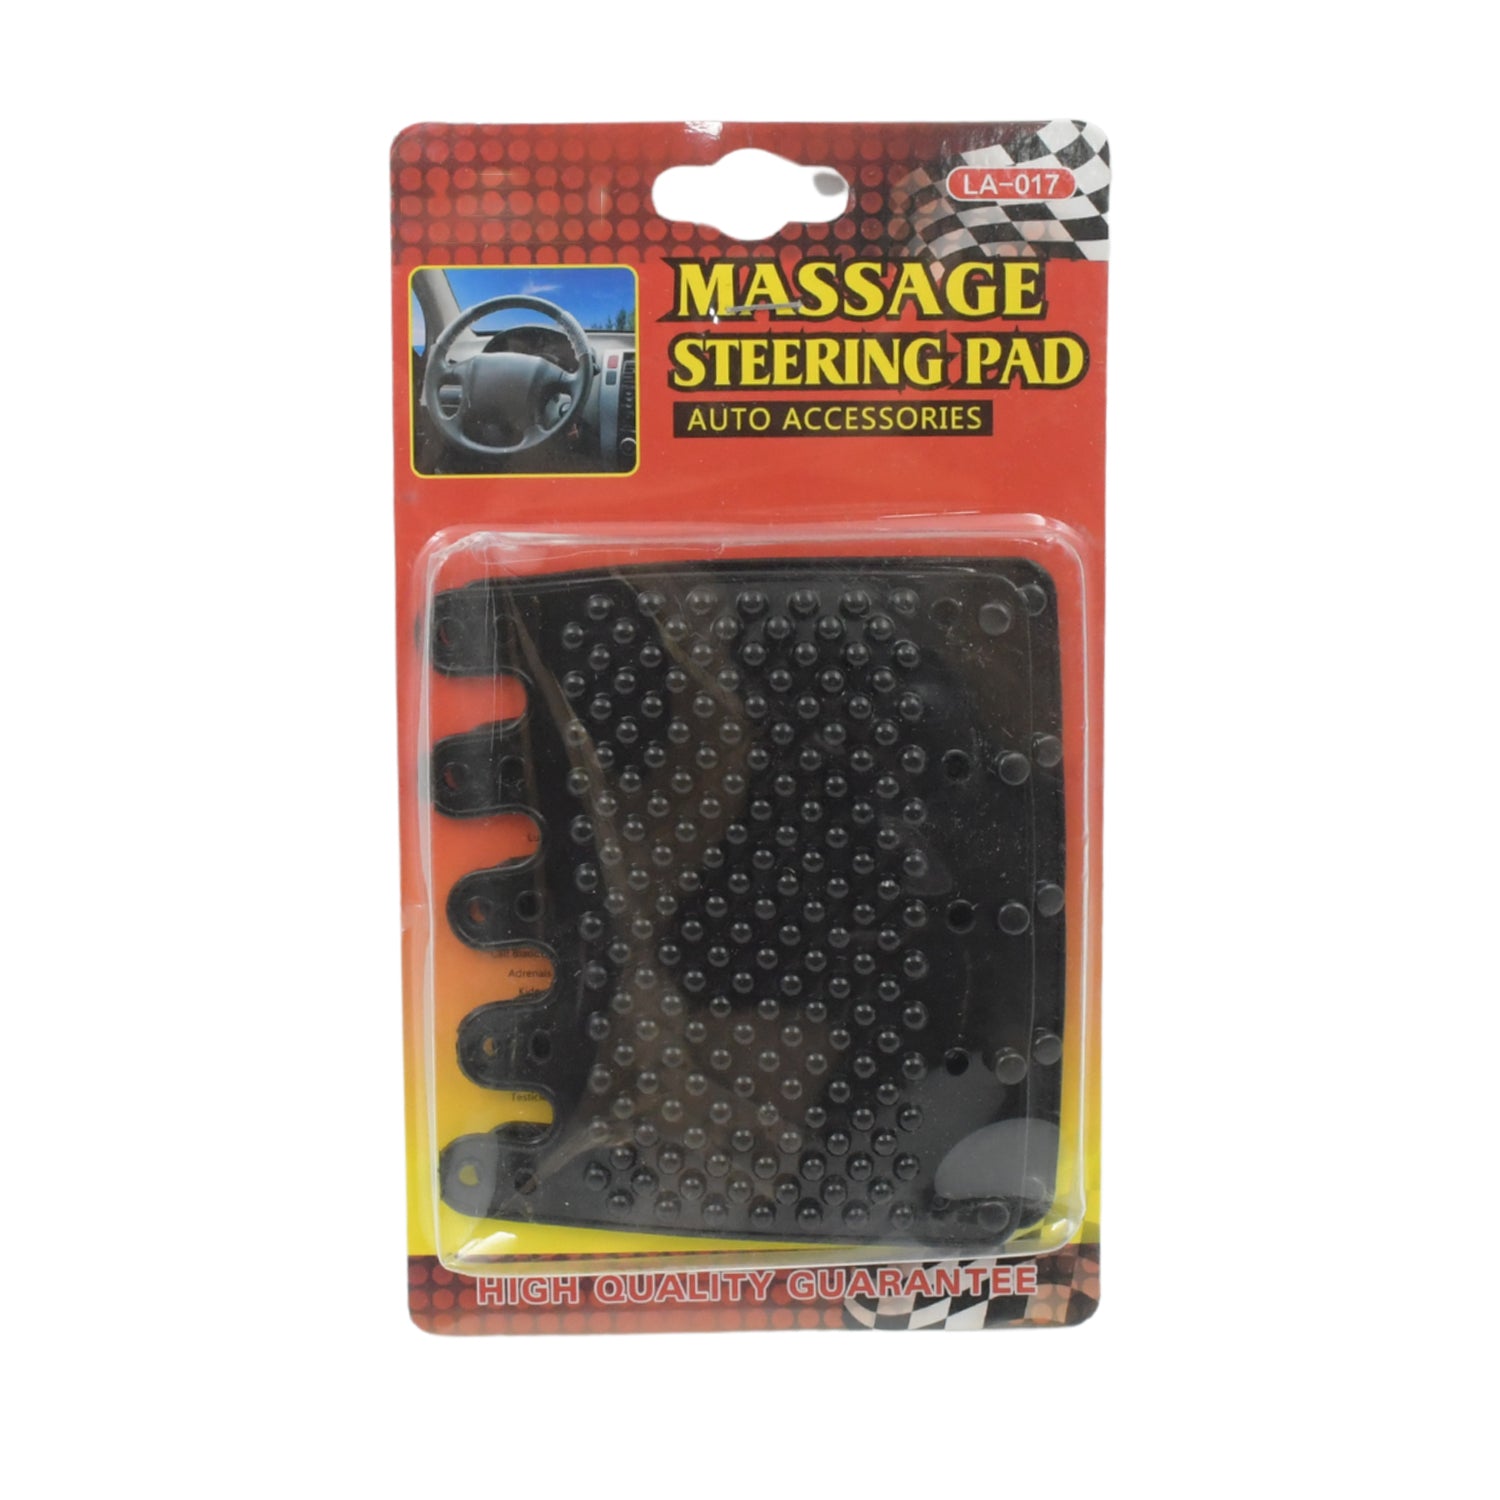 Silicon Car Massage Steering Cover High Quality Silicon Massger Pad Suitable For All Car (2 Pc Set)